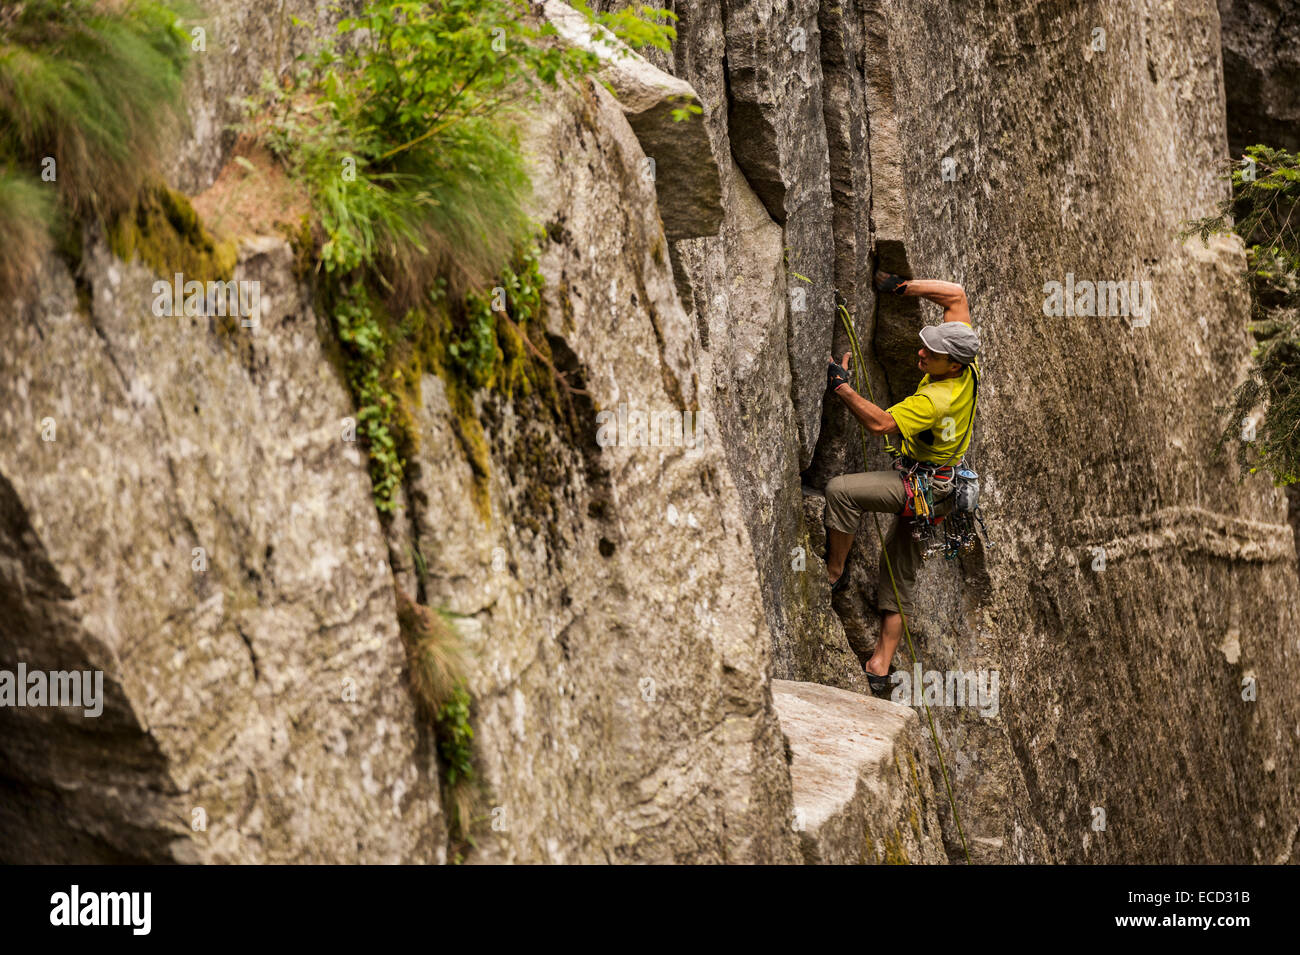 Man trad climbing a crack route in Esigo, Ossola, Italy. Ossola is one of the main destination in Europe for crack climbing. Stock Photo